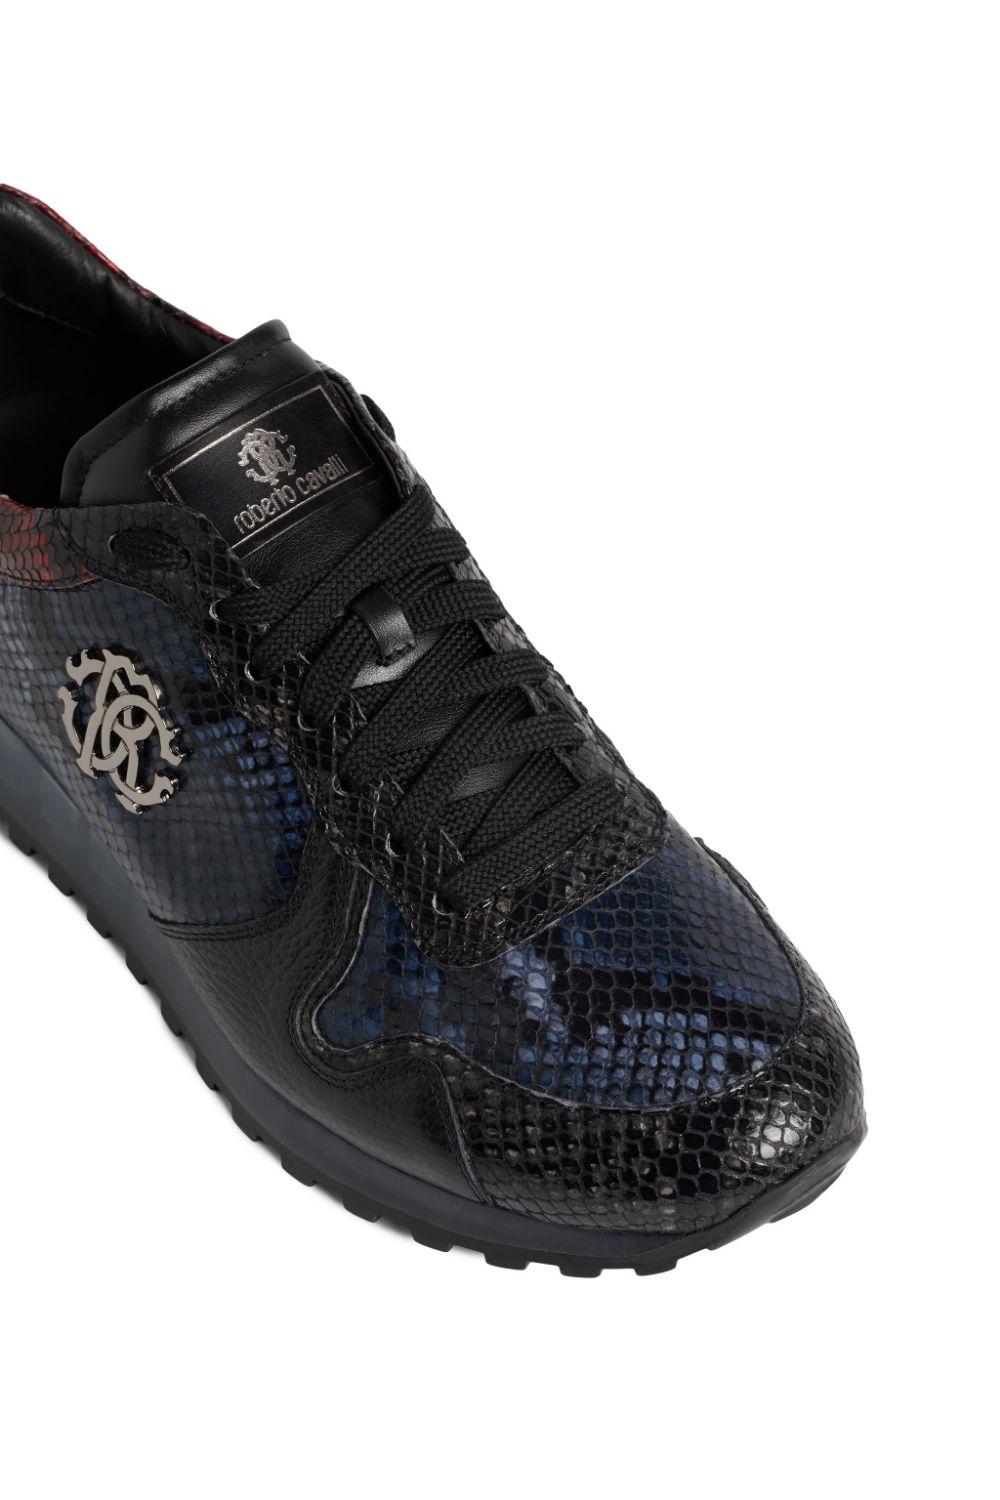 Roberto Cavalli Snake Print Lace Up Sneakers in Black for Men - Save 37 ...